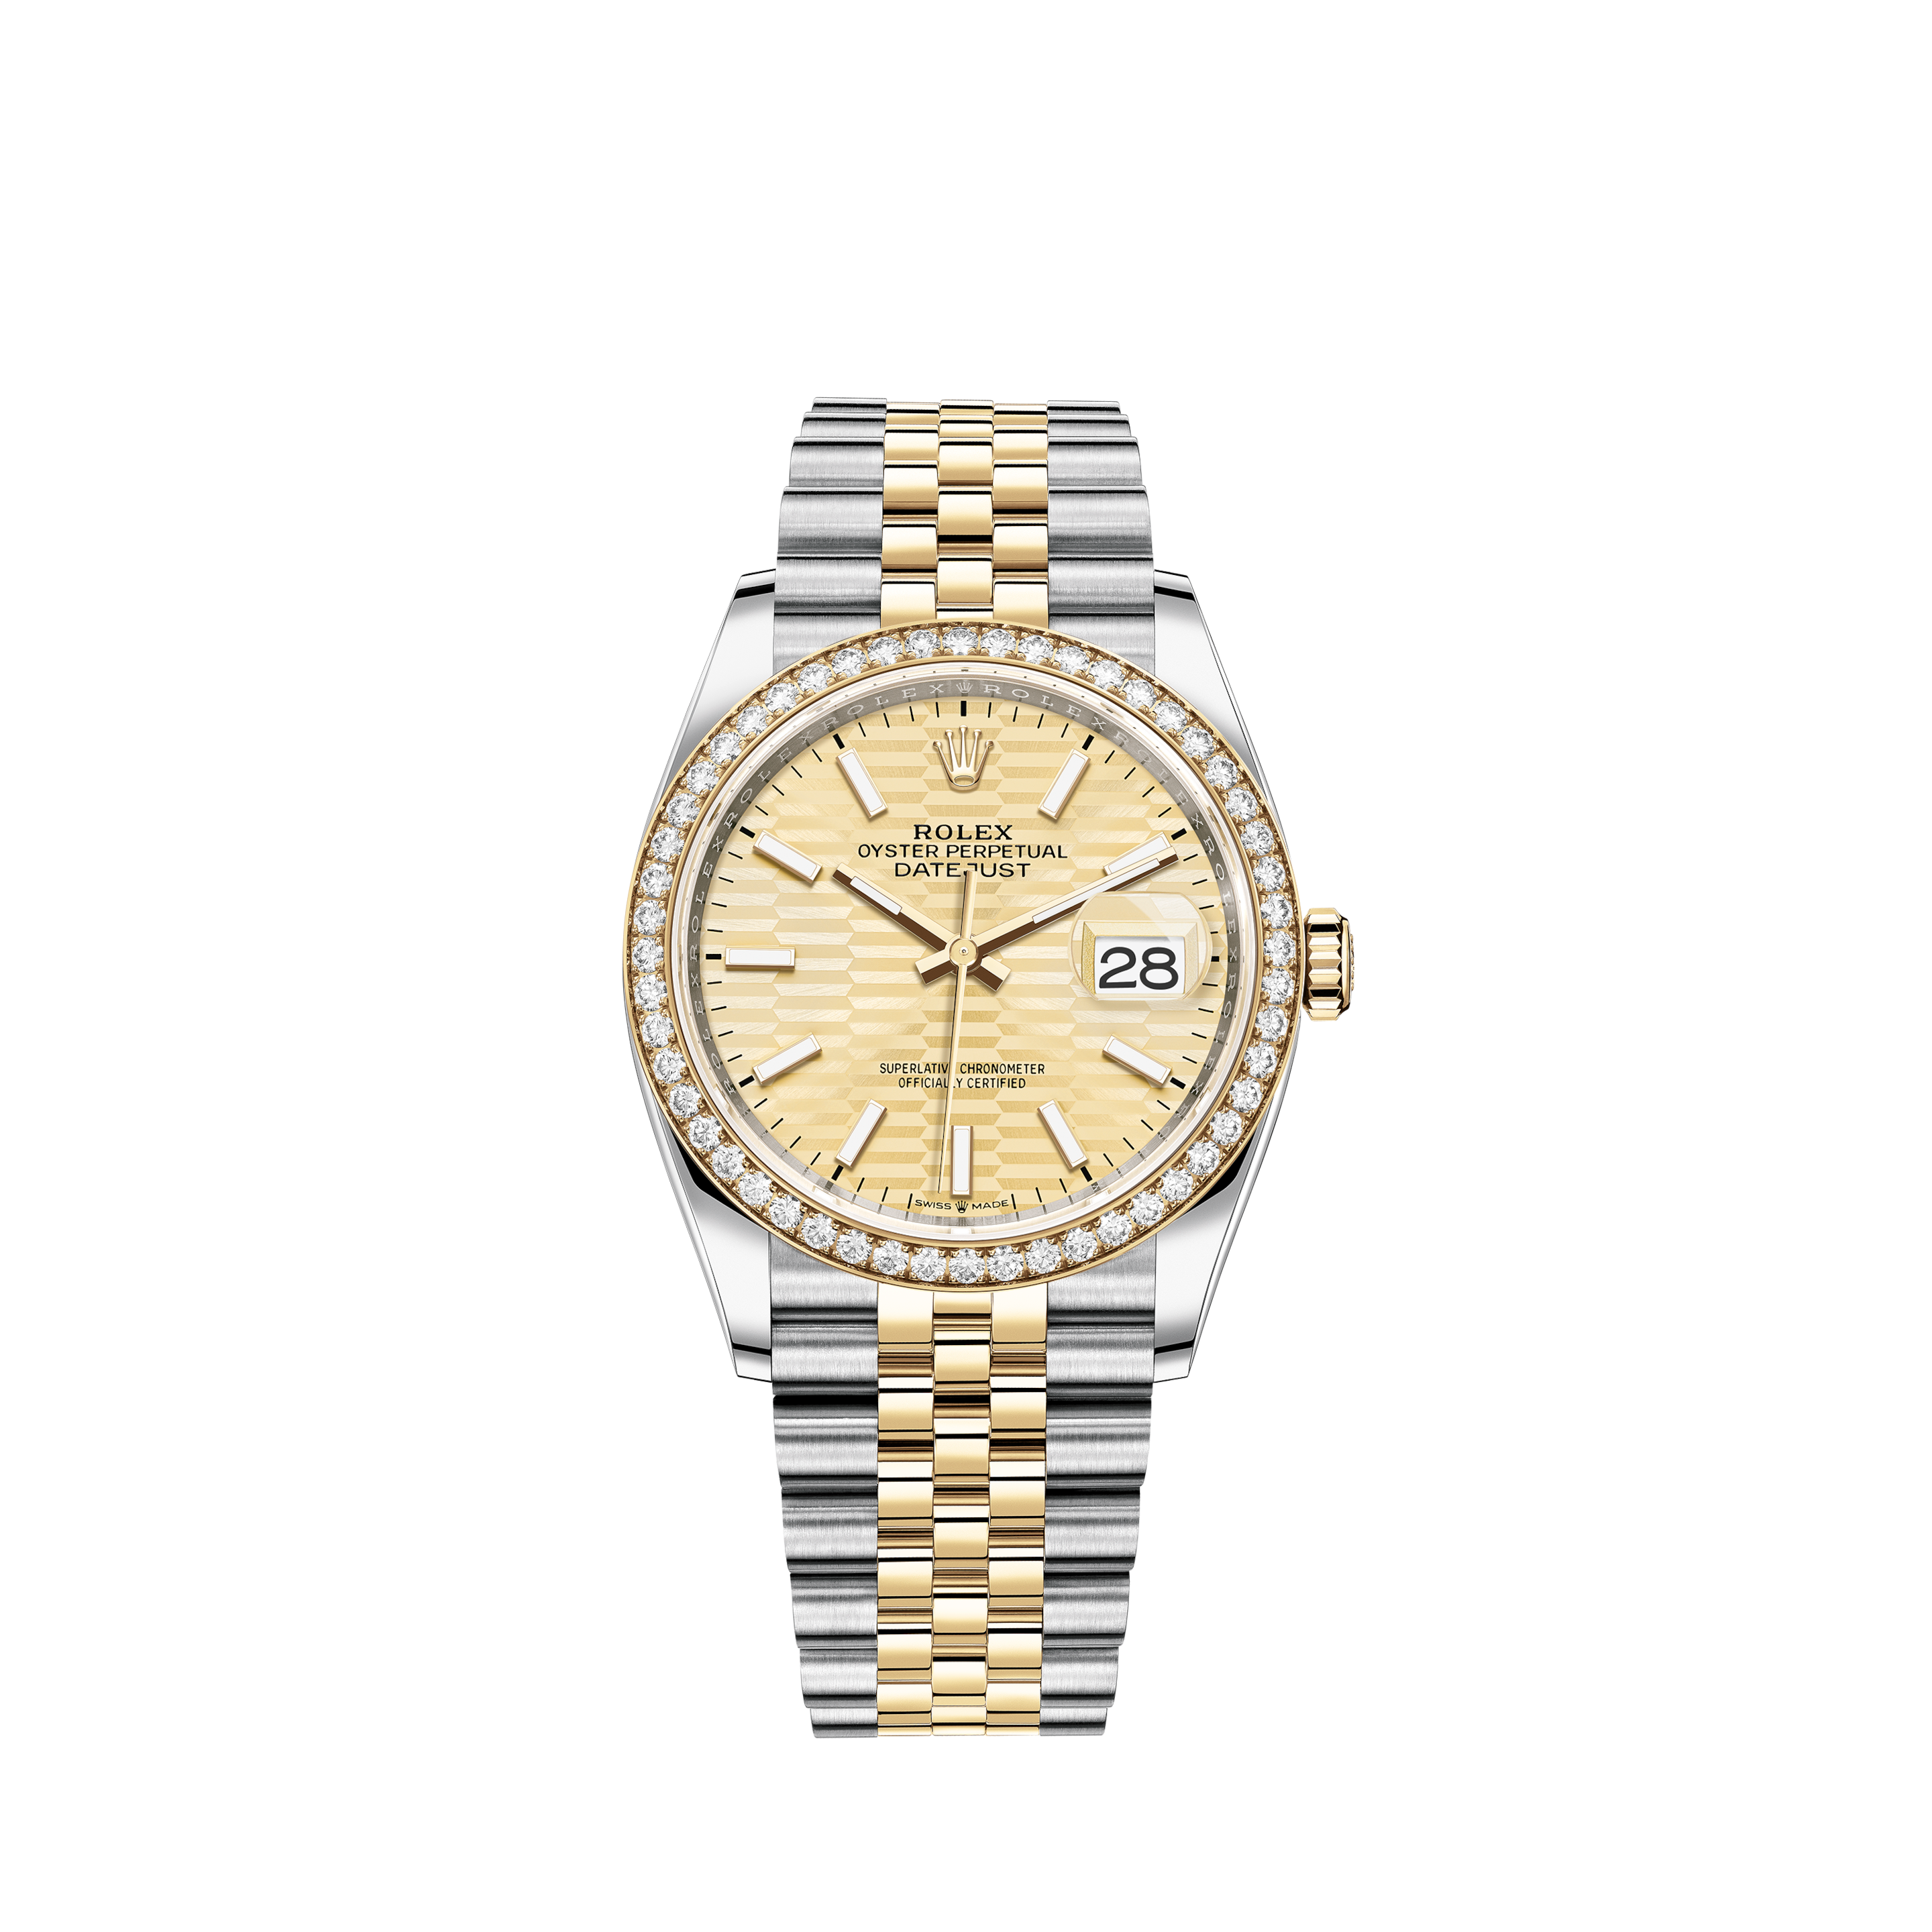 Rolex Ladies President Gold Watch Silver Dial 6917